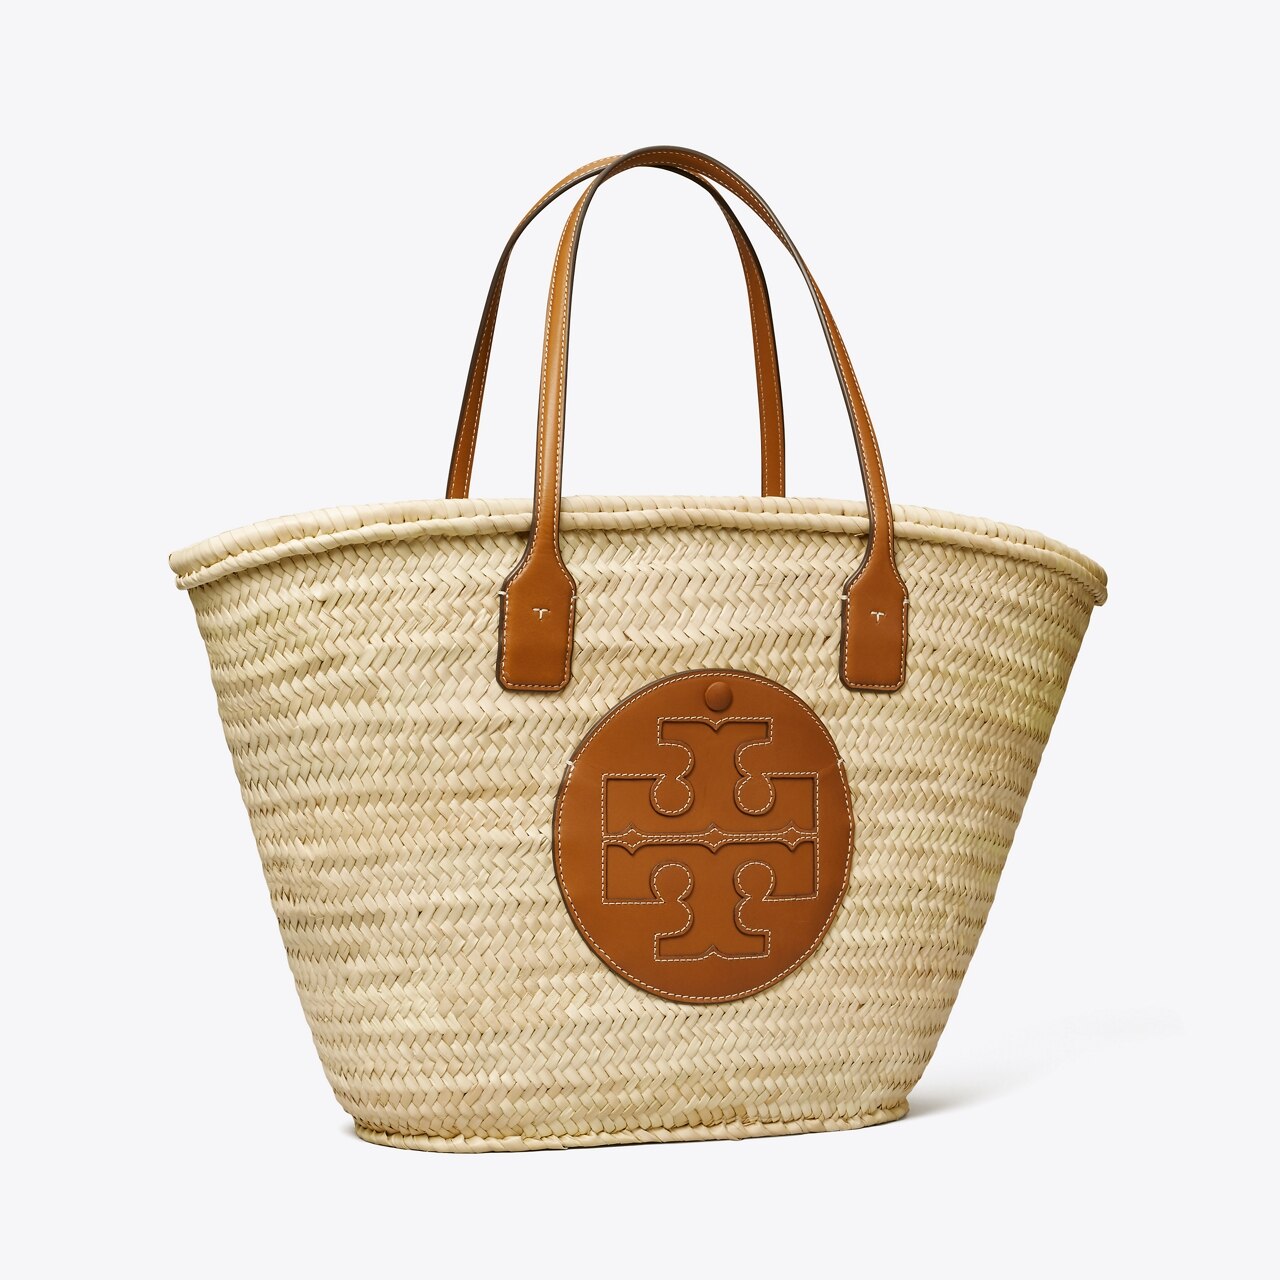 Tory Burch, Bags, Tory Burch Straw Tote Bag In Excellent Shape A Definite  Conversation Piece